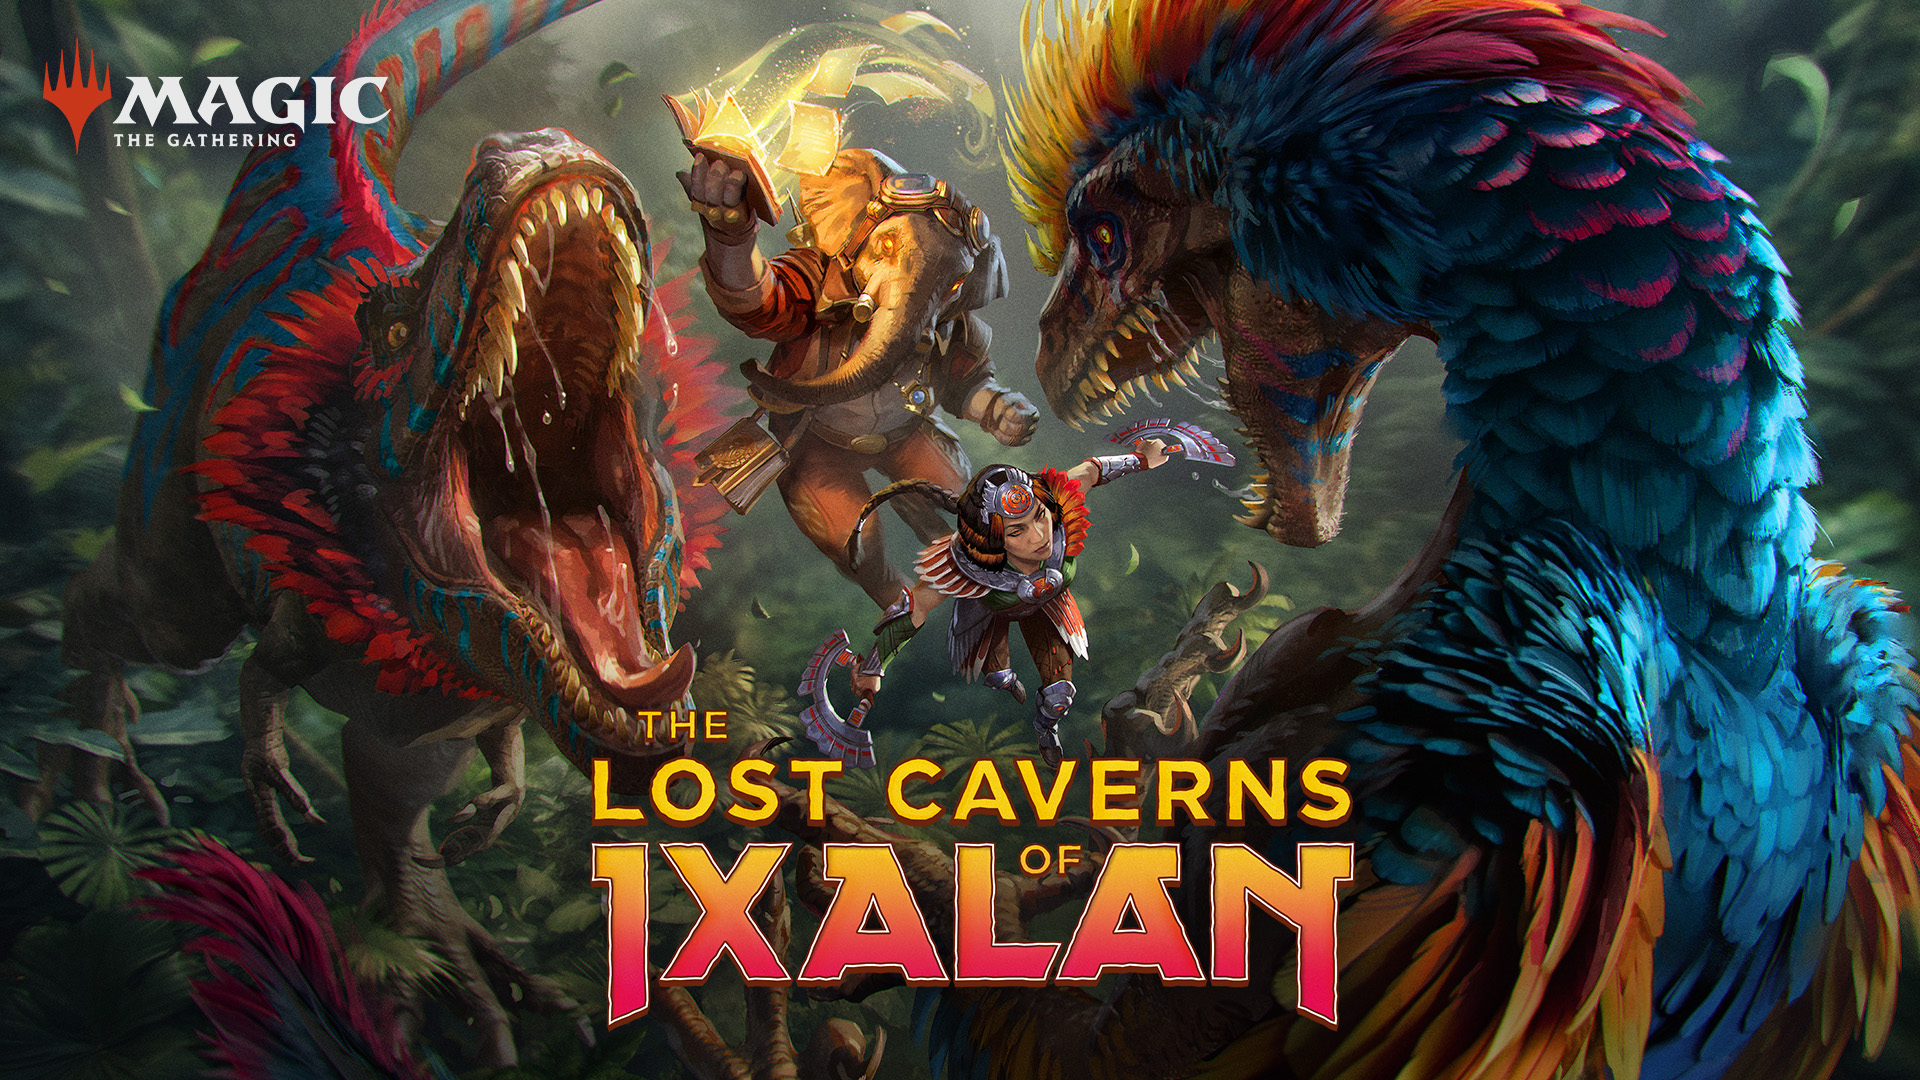 A First Look at The Lost Caverns of Ixalan®